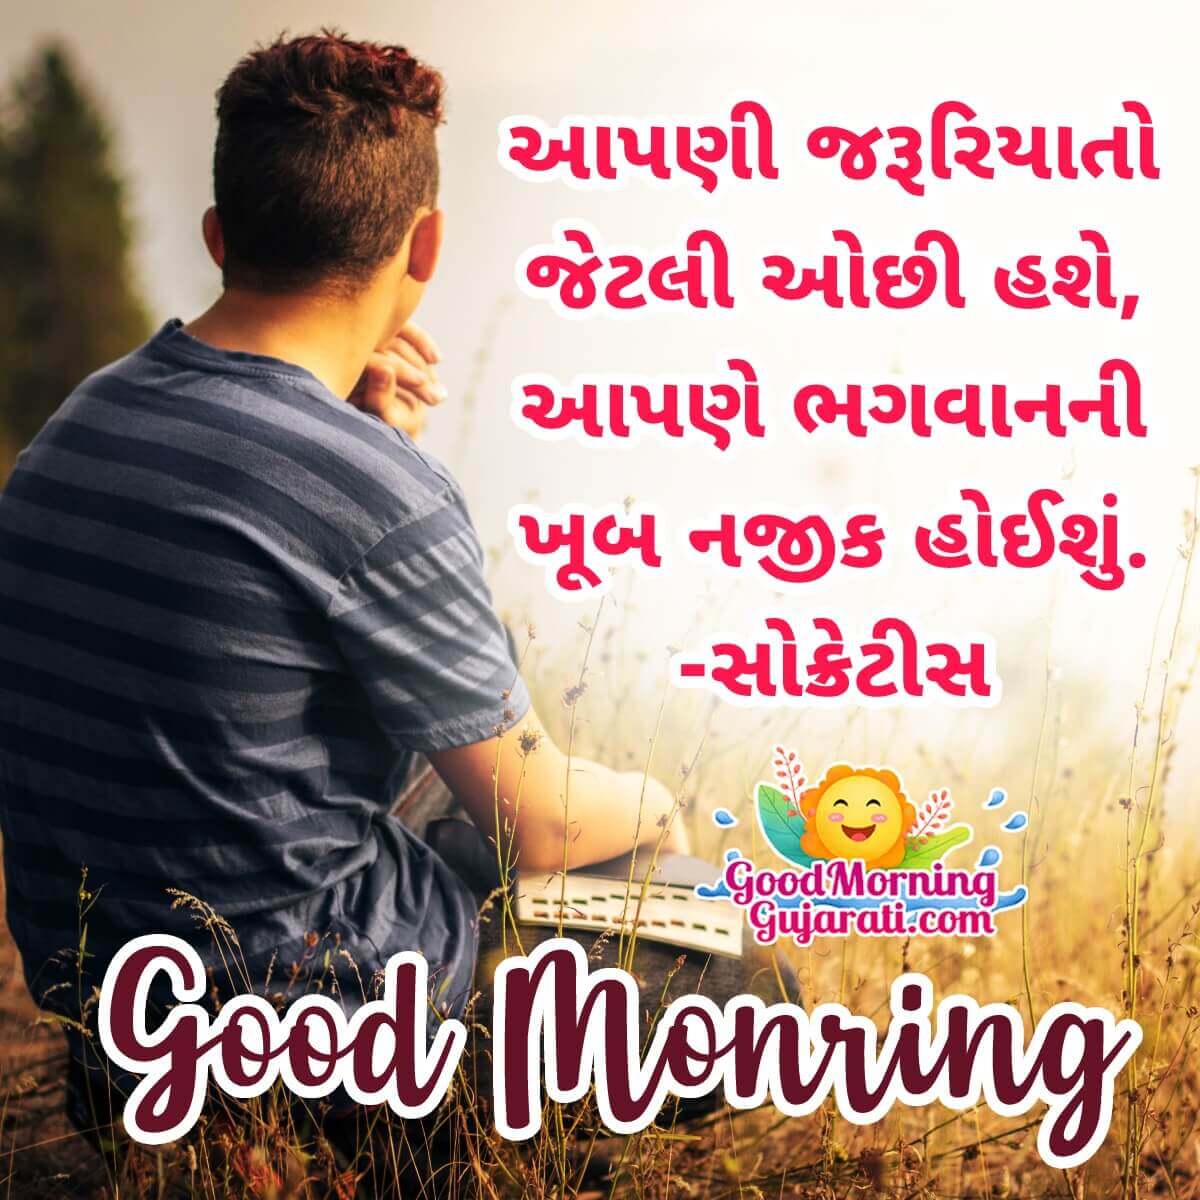 Good Morning Gujarati Quotes - Good Morning Wishes & Images in ...